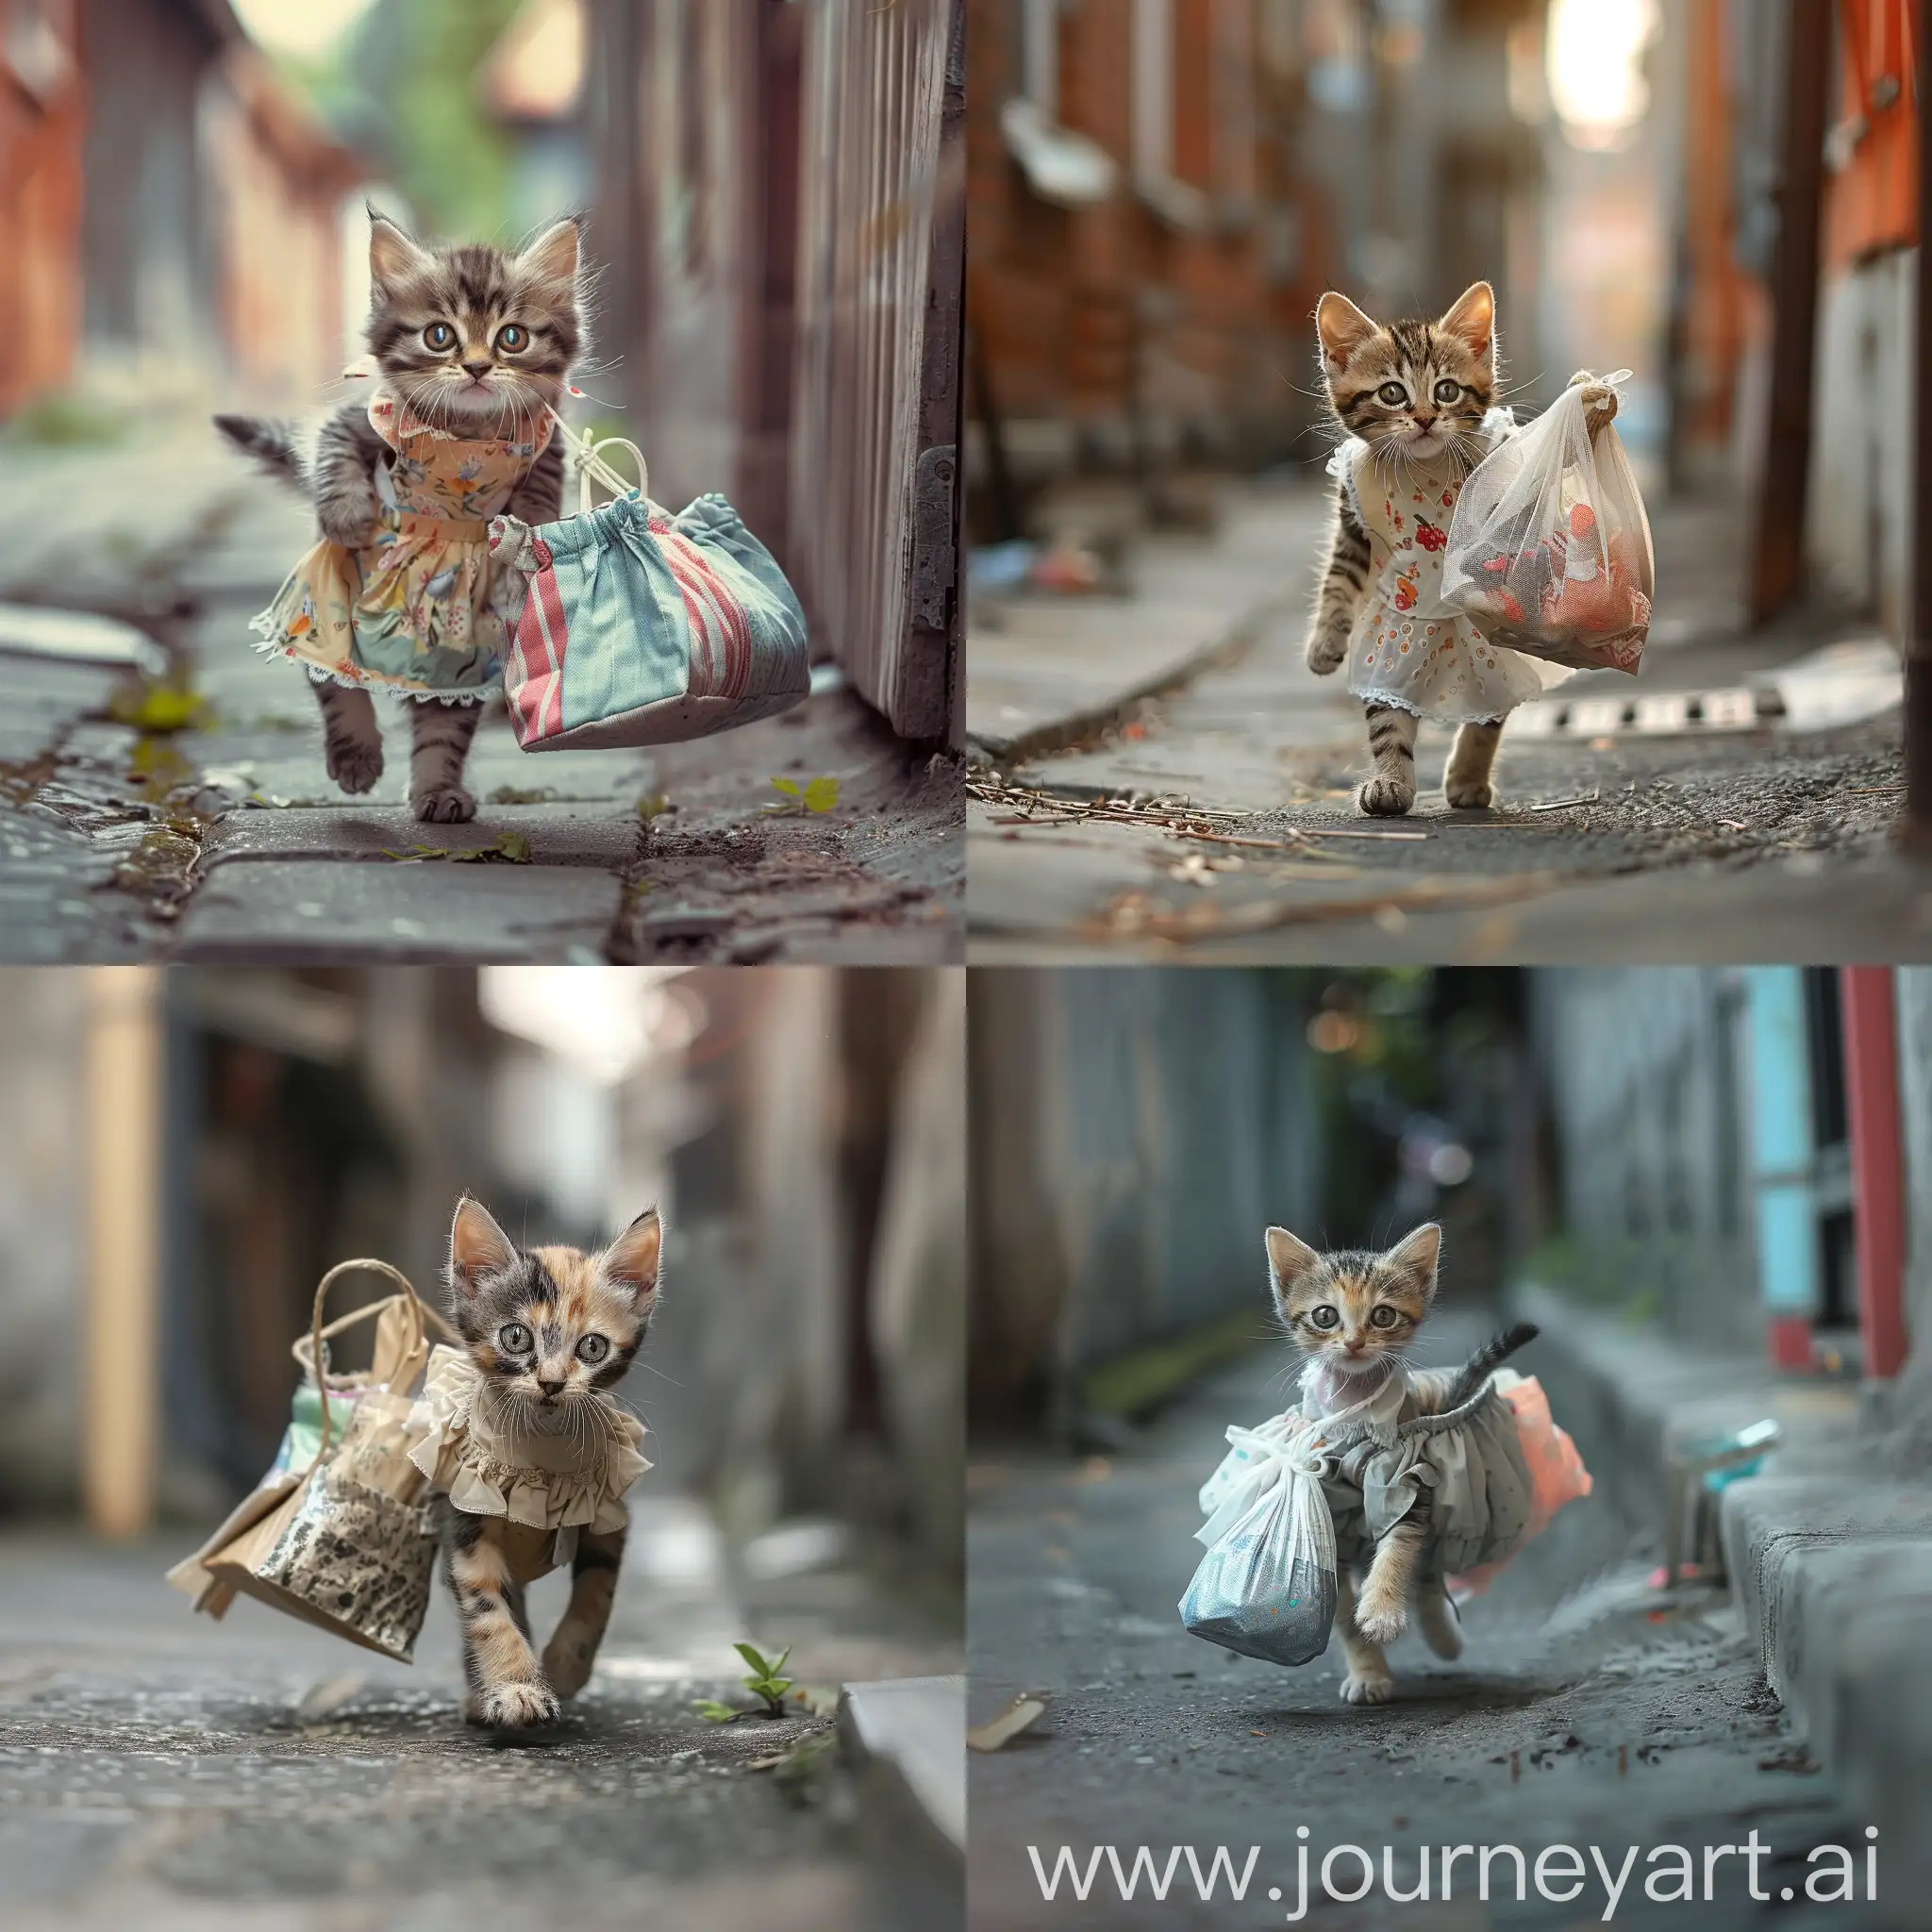 Adorable-Kitten-Strolling-in-Dress-with-Bag-of-New-Clothes